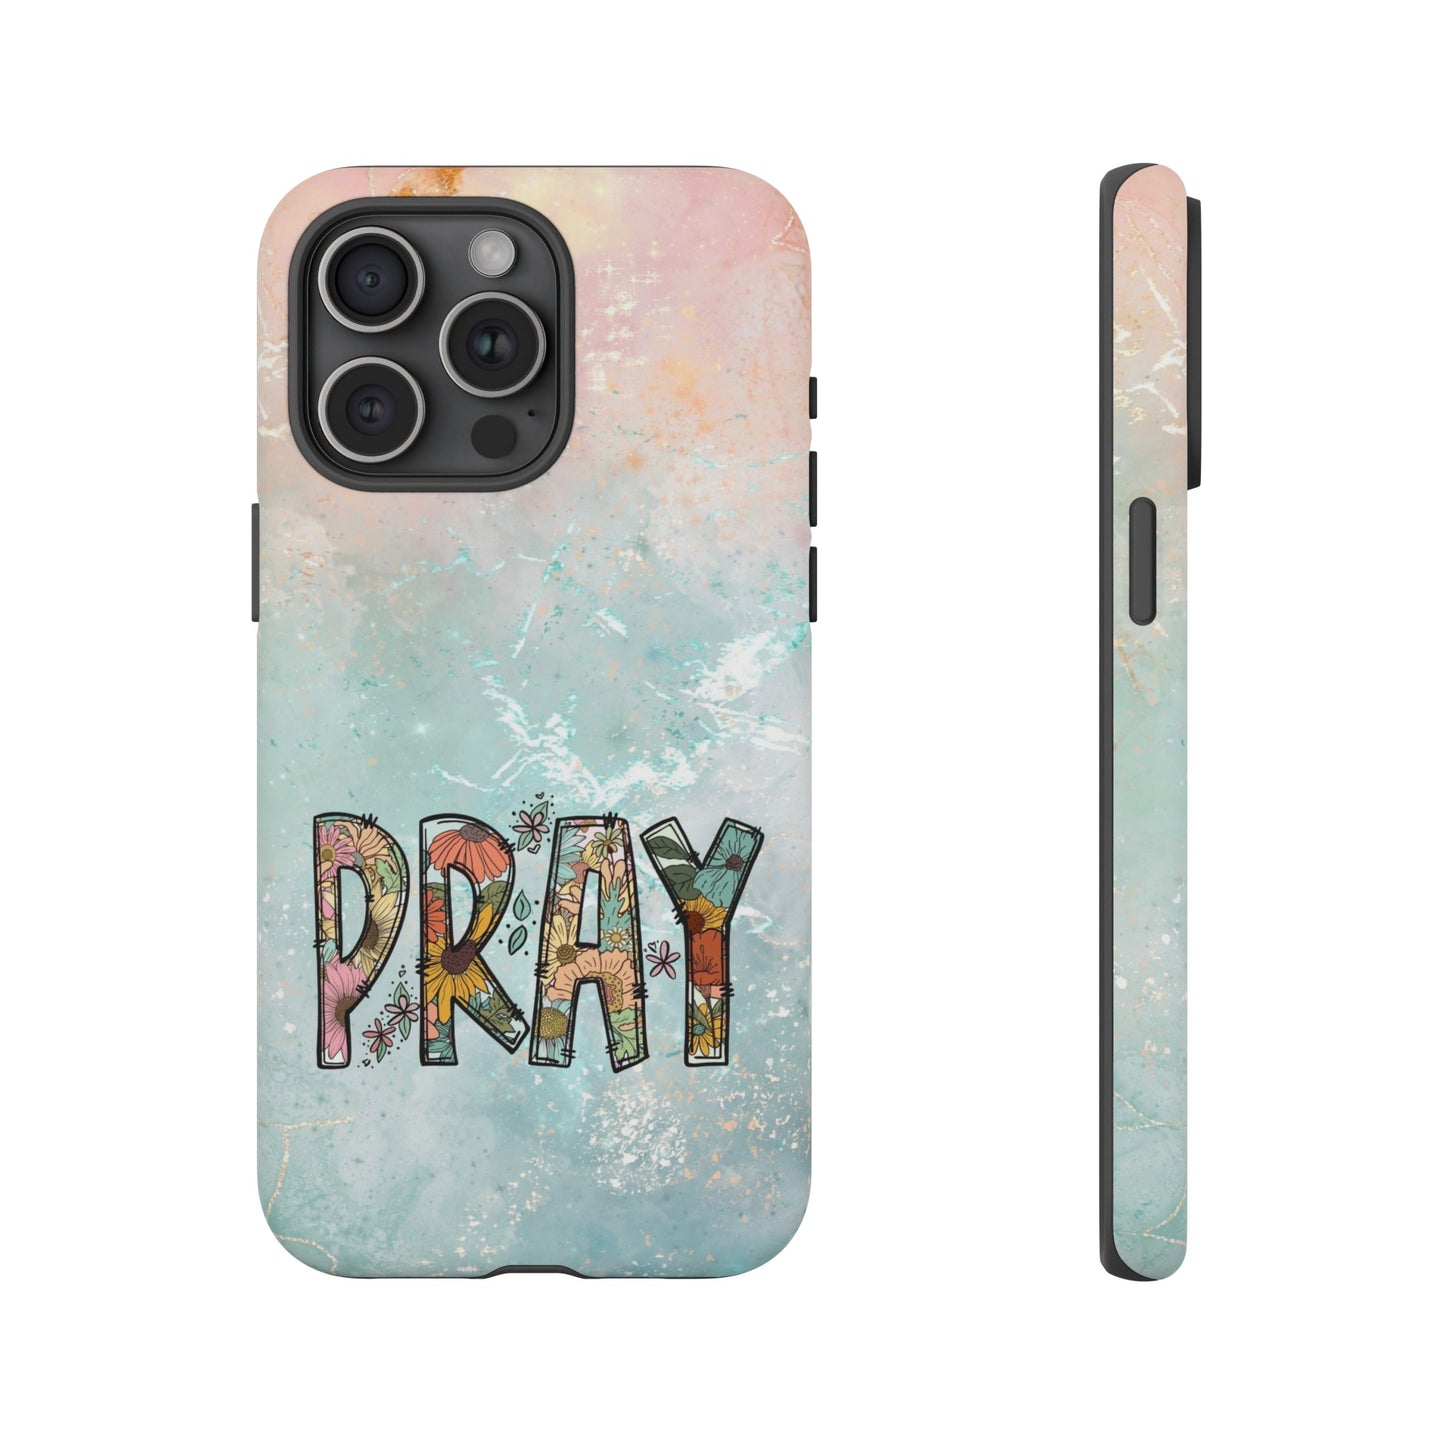 Floral PRAY iPhone Protective Cases